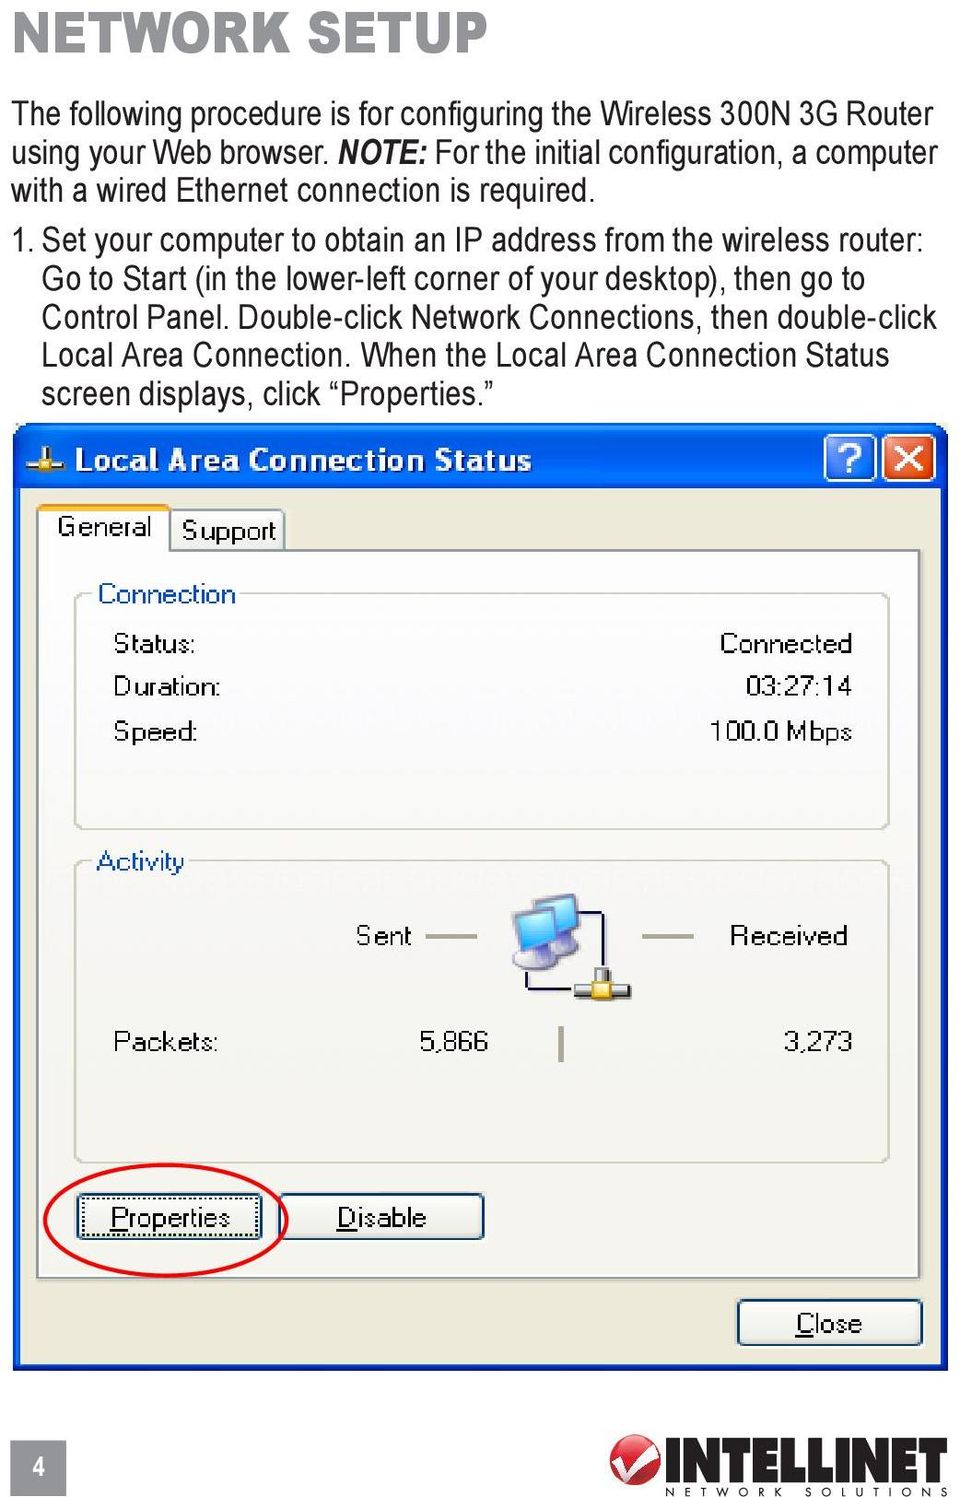 Set your computer to obtain an IP address from the wireless router: Go to Start (in the lower-left corner of your desktop),